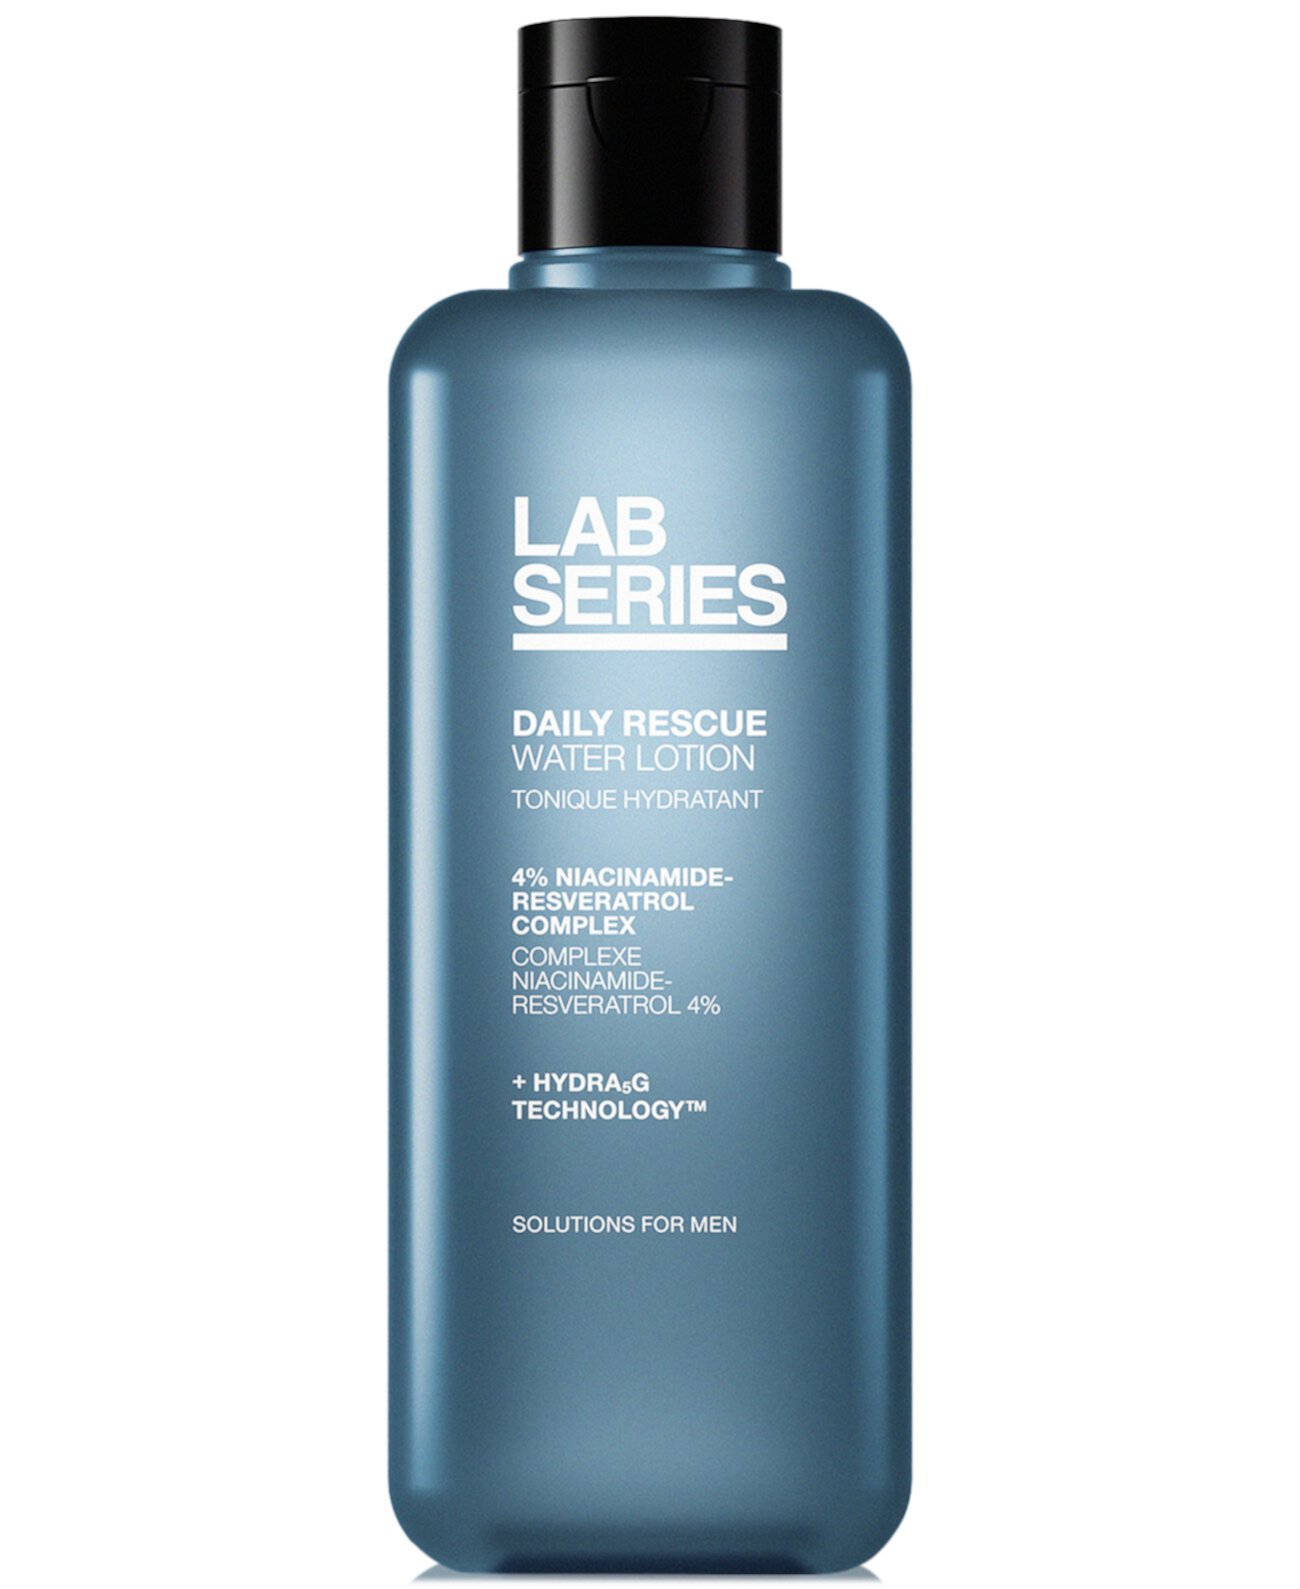 Skincare For Men Daily Rescue Water Lotion, 6.7 oz. Lab Series